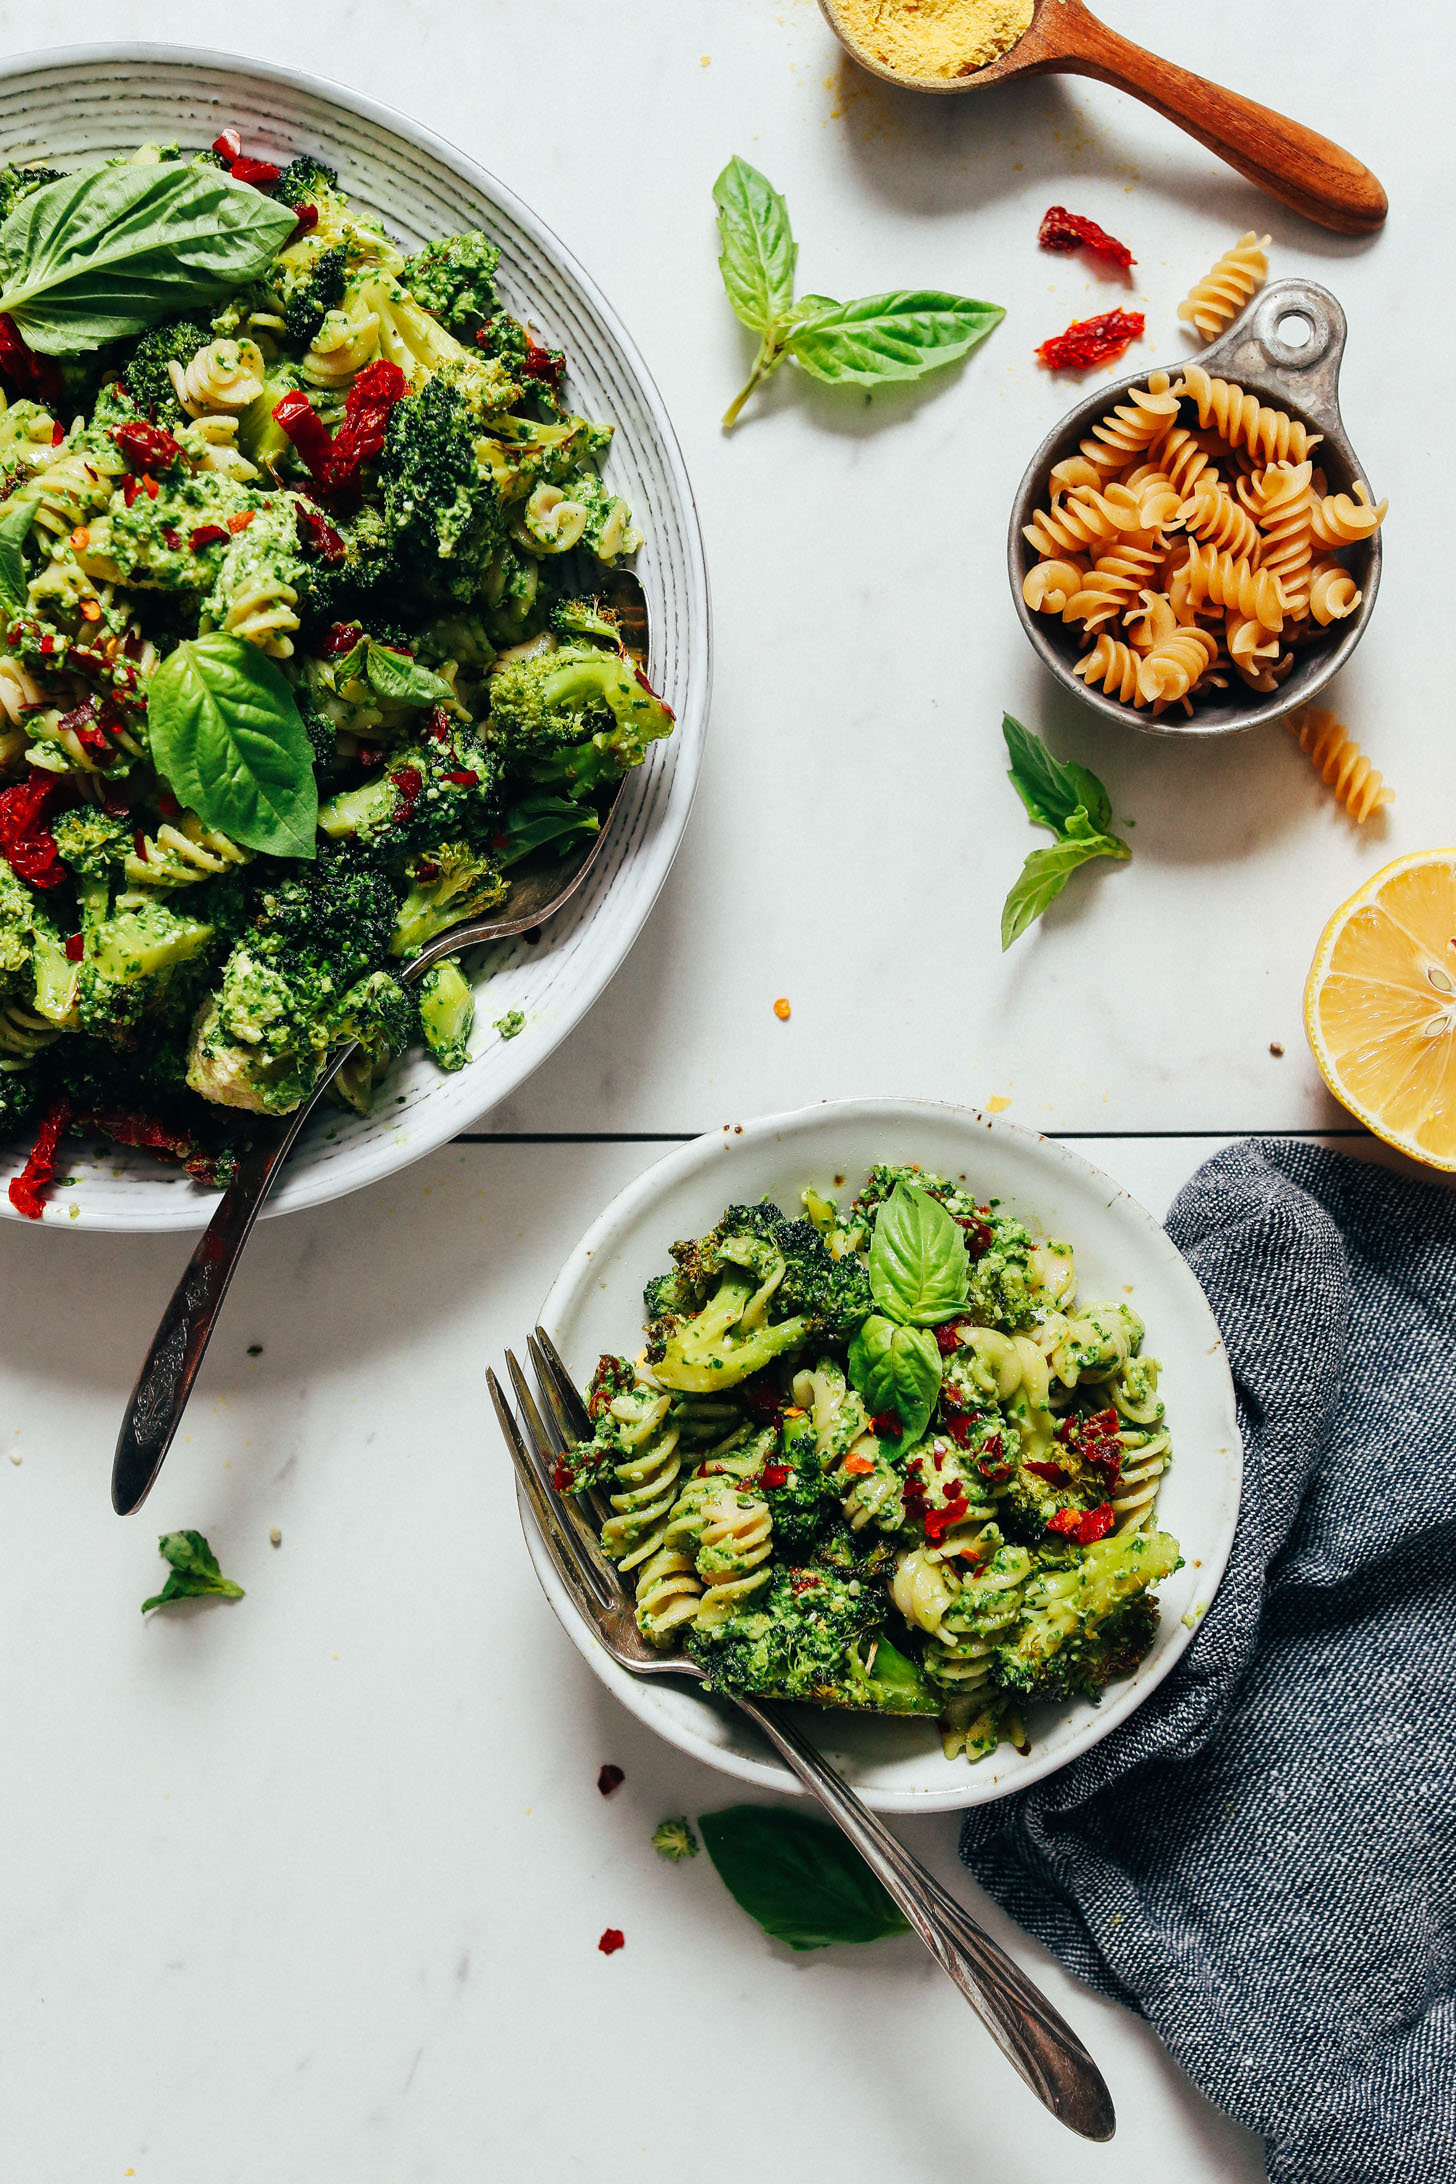 Small and large bowls of our Pesto Broccoli Pasta Salad with Sun-dried Tomatoes